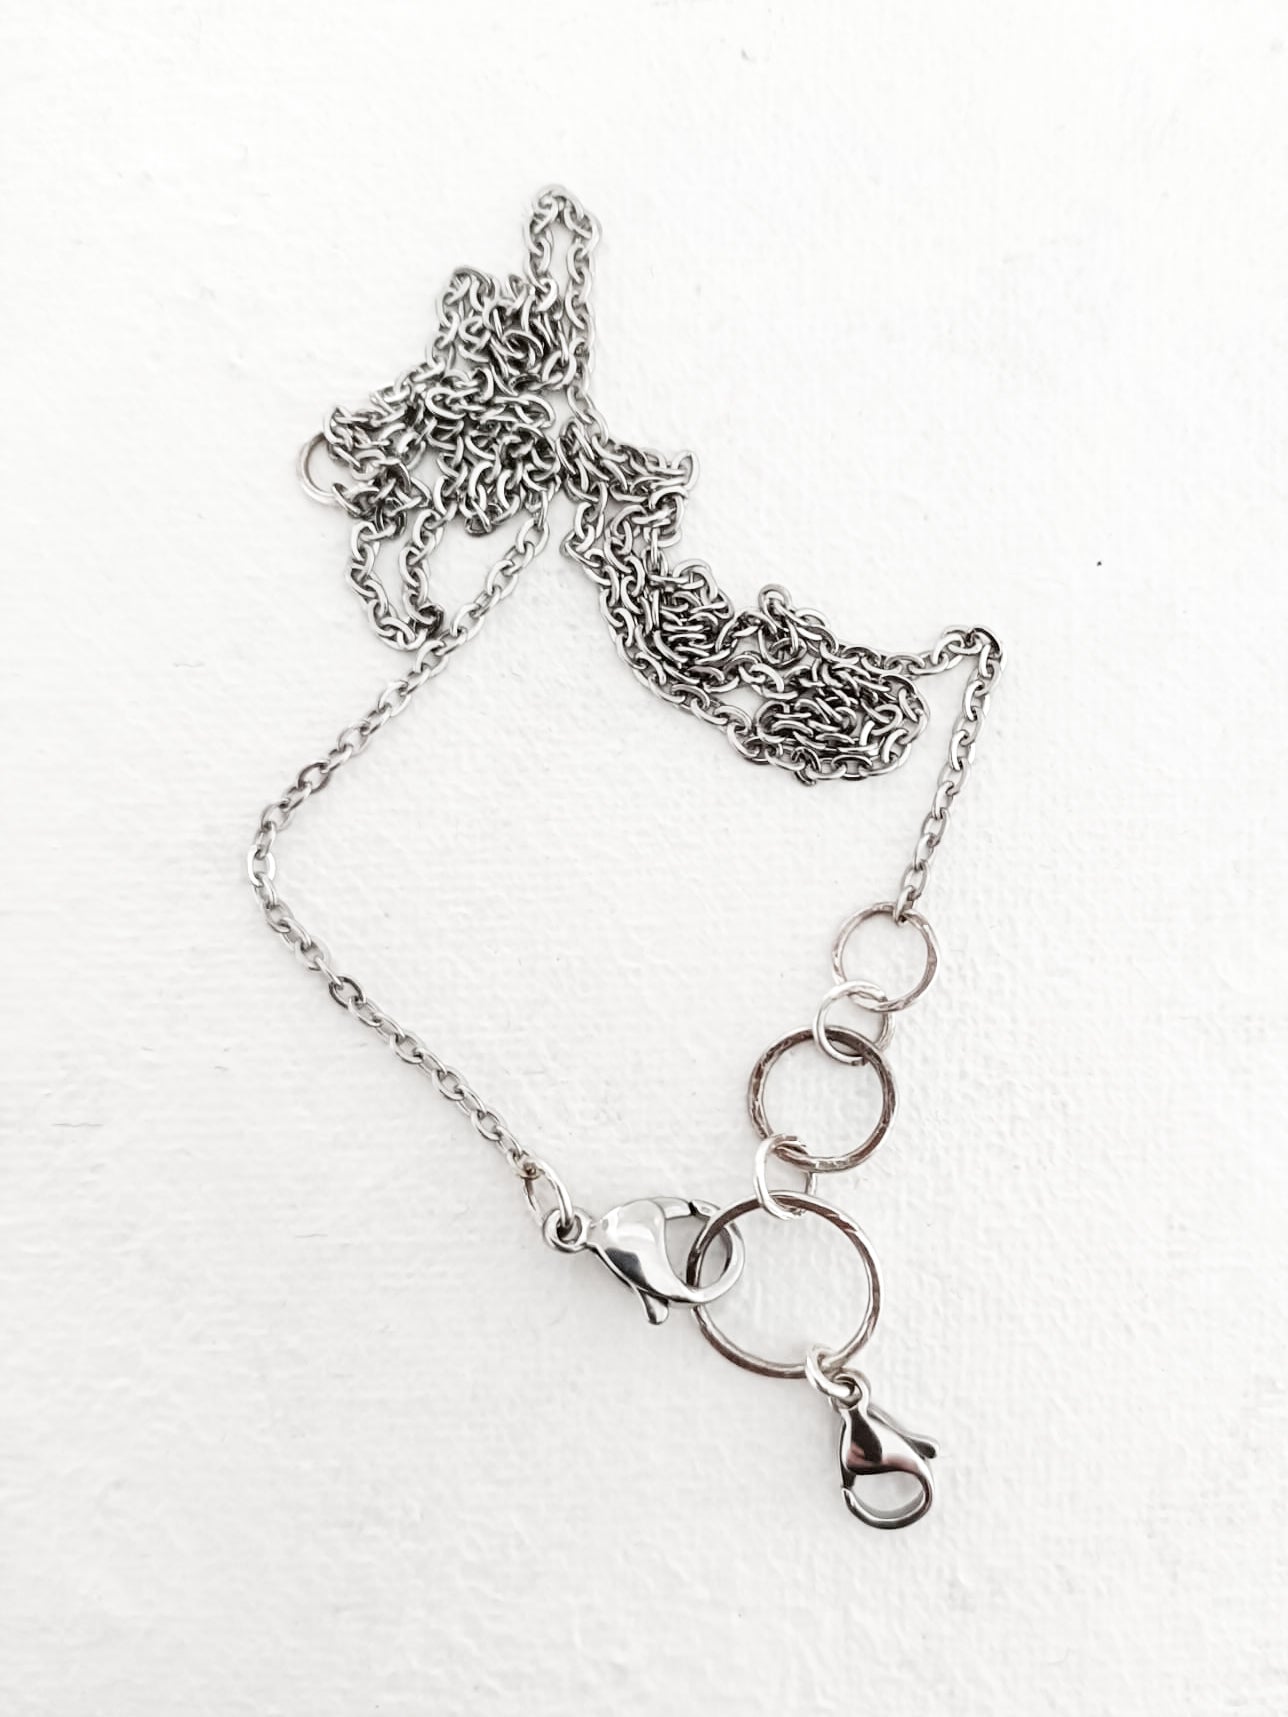 Adjustable Chain with Pendant Clip-on